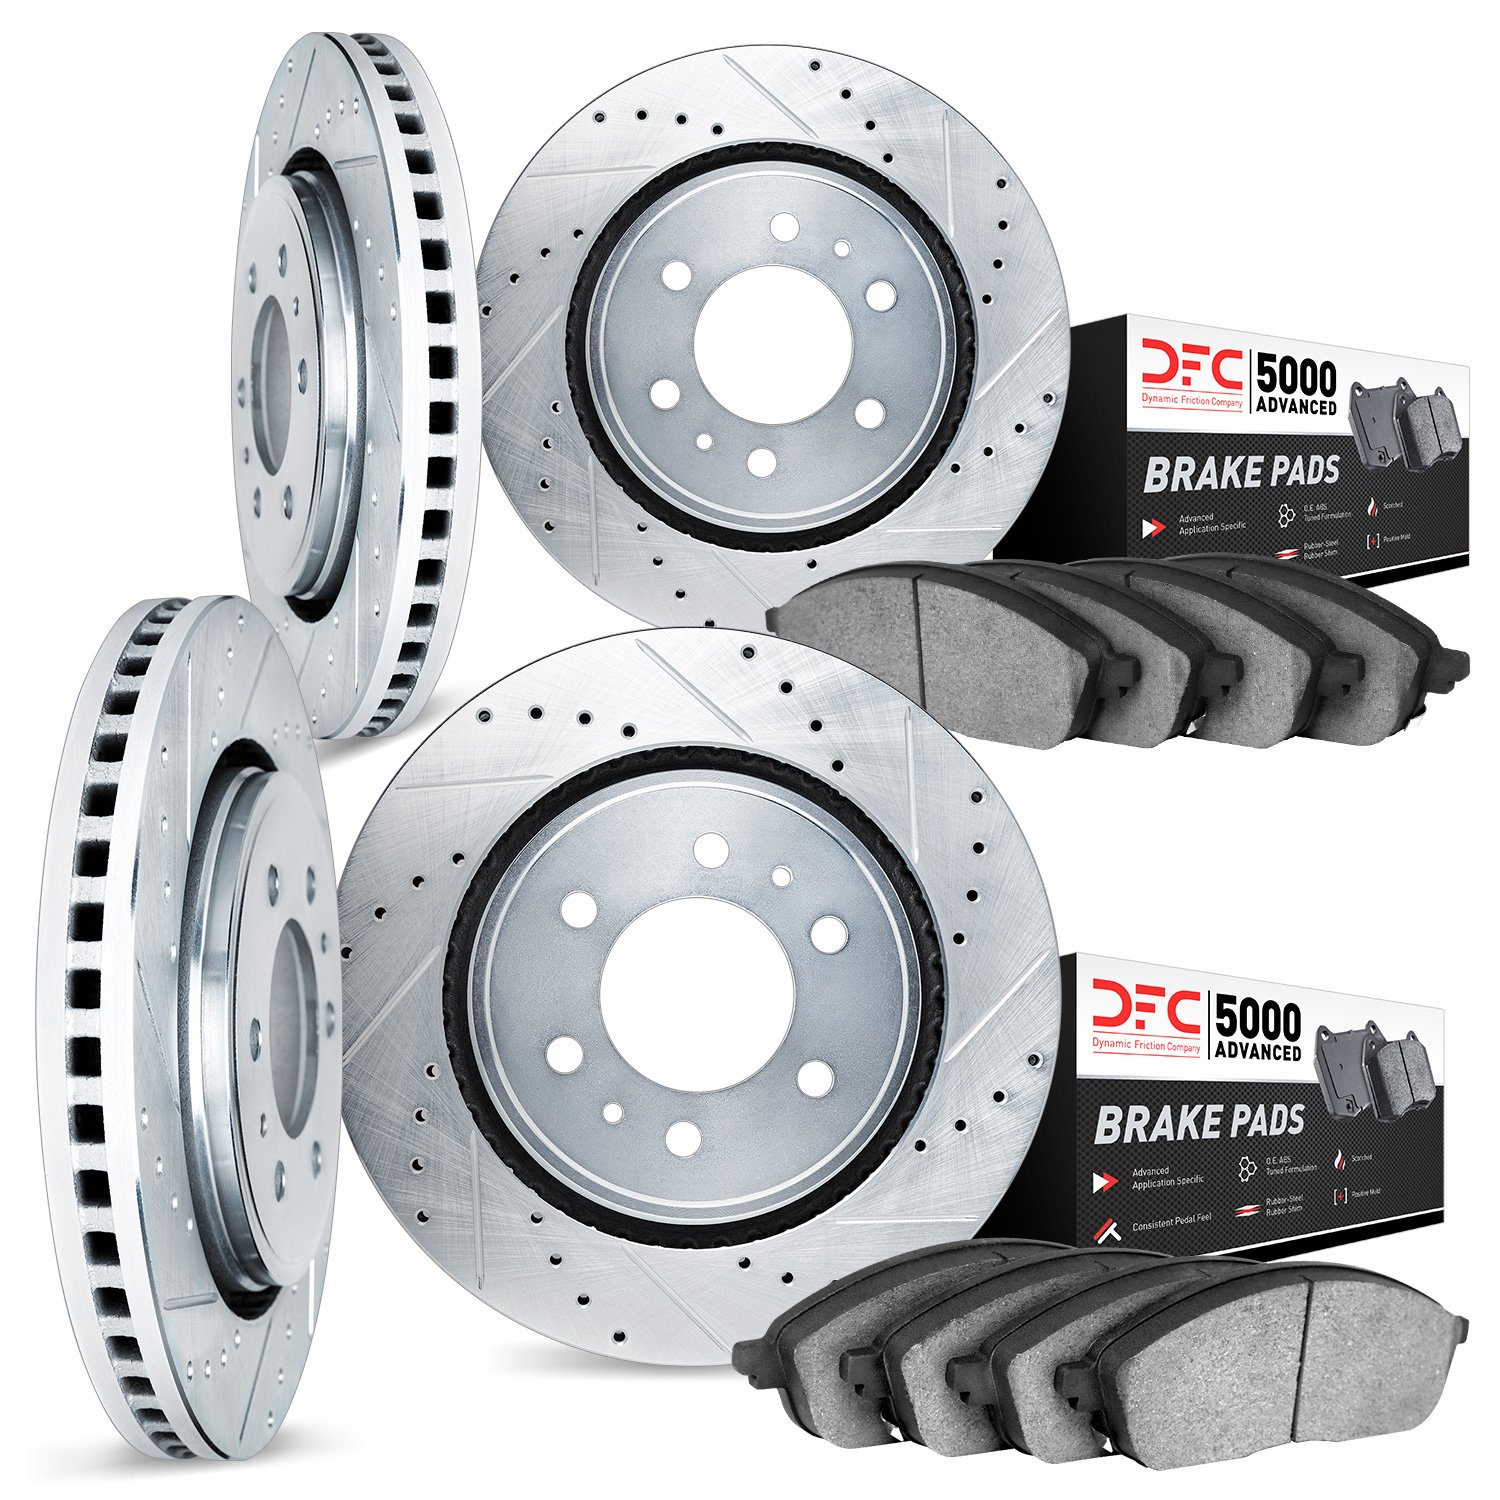 7504-54349 Drilled/Slotted Brake Rotors w/5000 Advanced Brake Pads Kit [Silver], 2002-2006 Ford/Lincoln/Mercury/Mazda, Position: